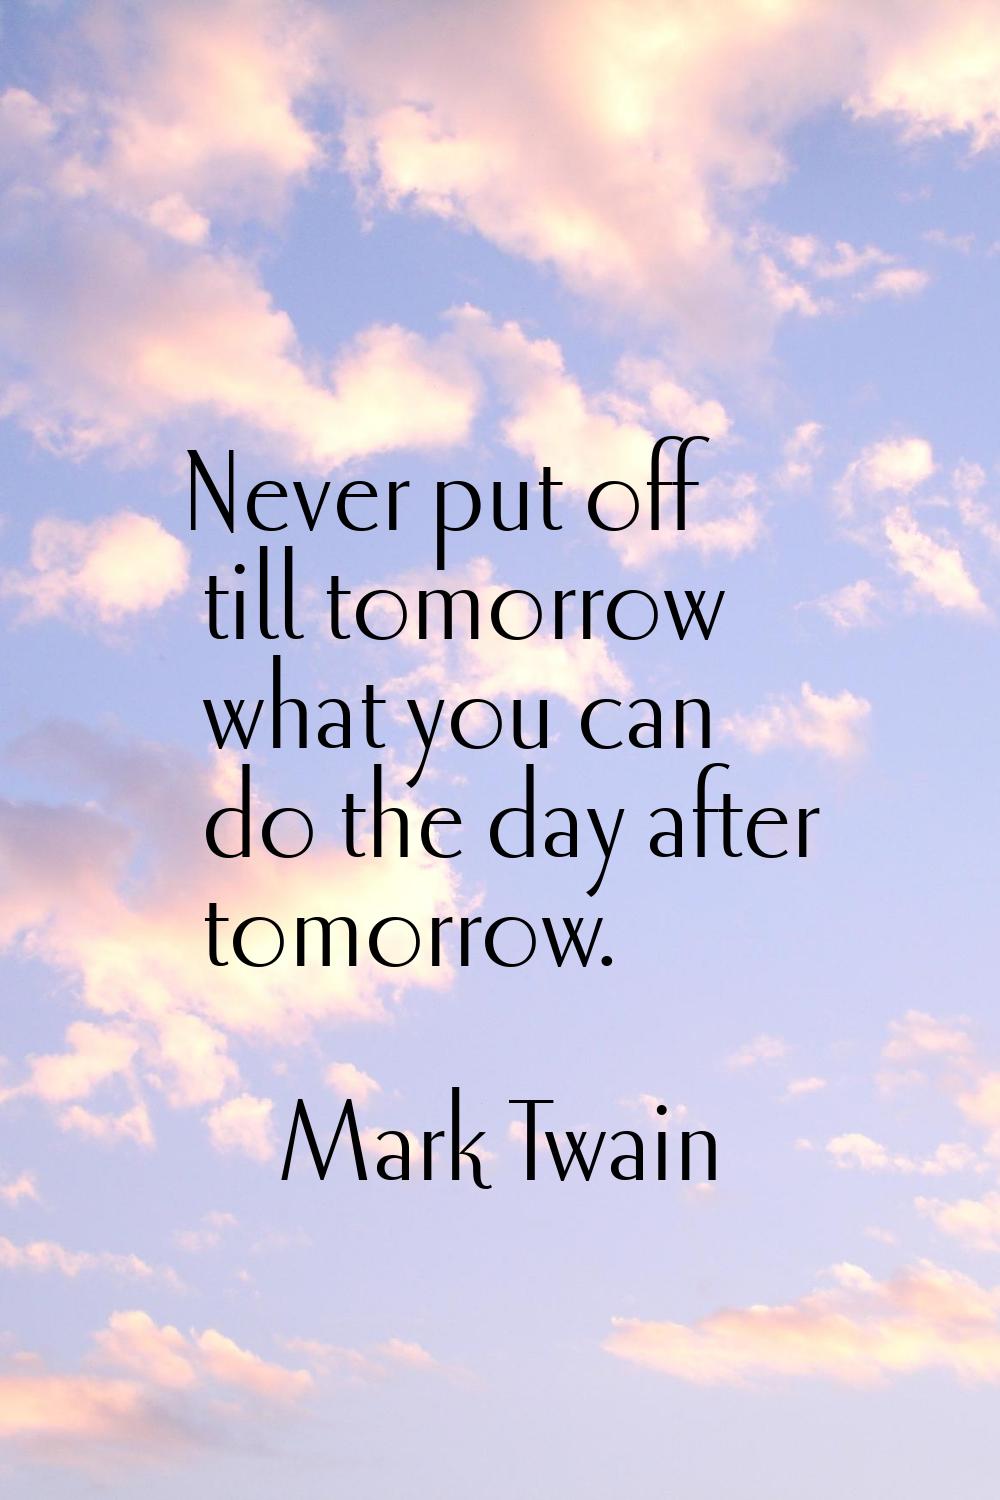 Never put off till tomorrow what you can do the day after tomorrow.